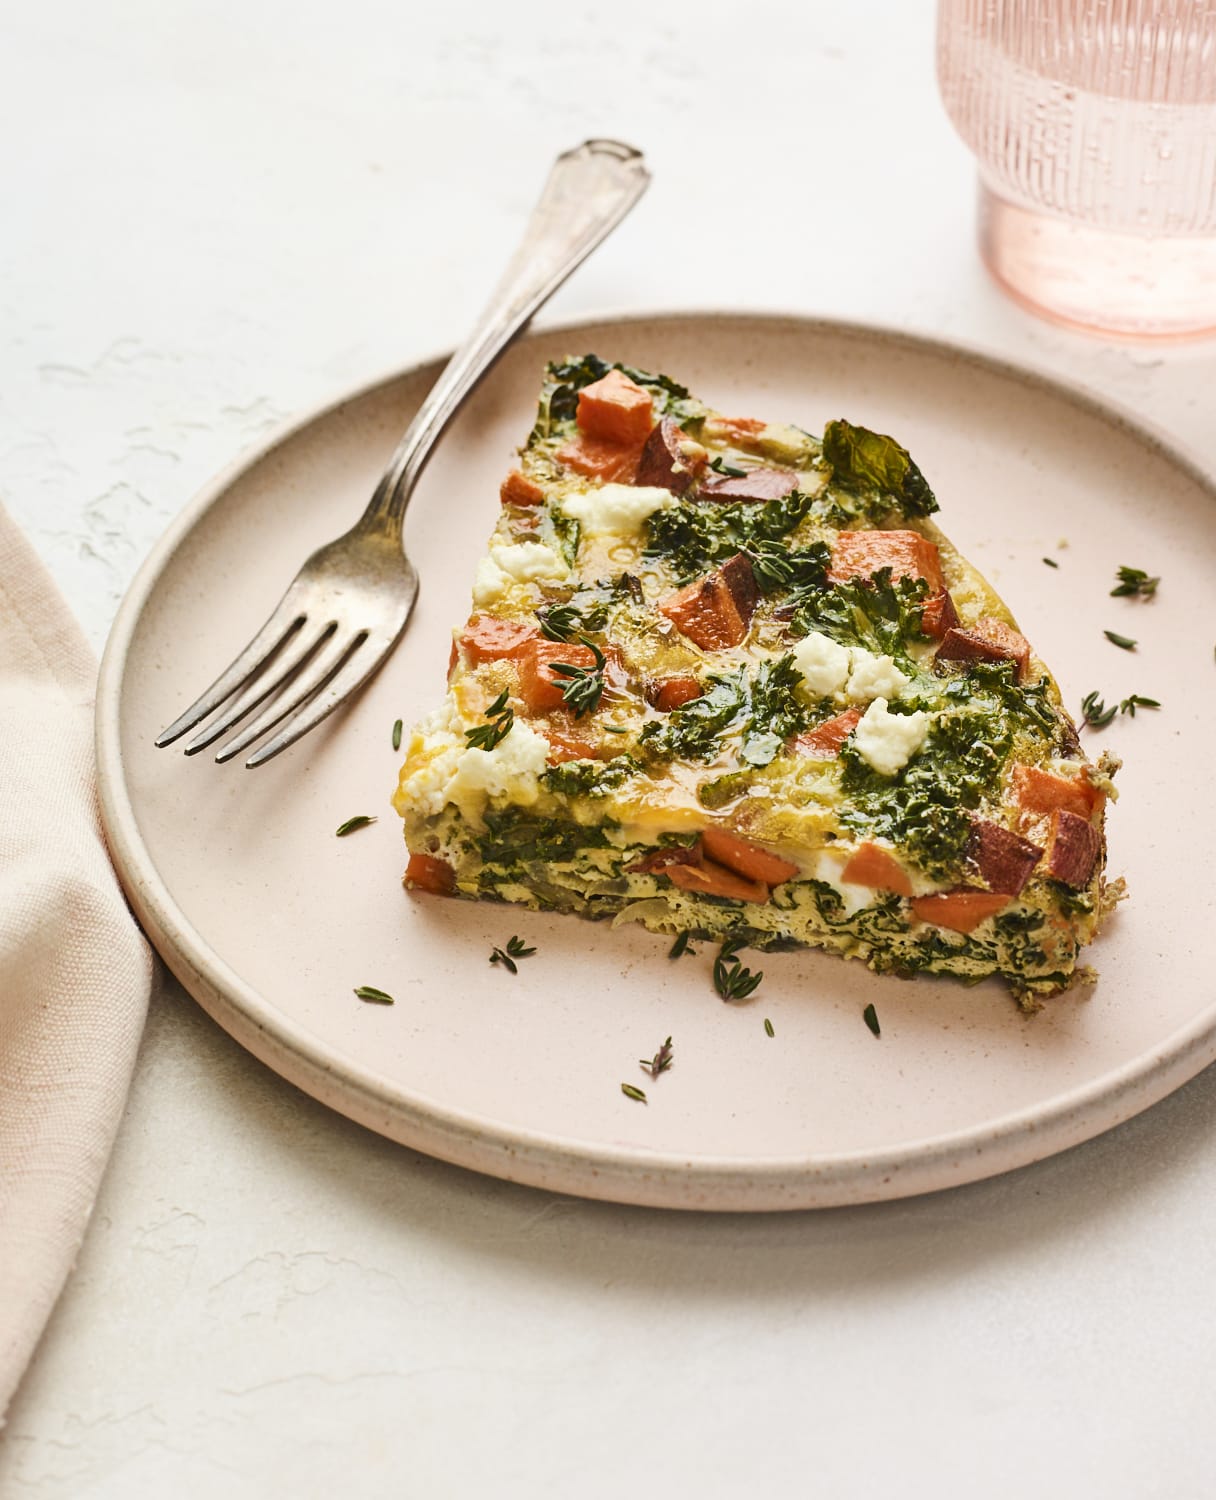 Slice of sweet potato kale frittata on a plate with a fork.